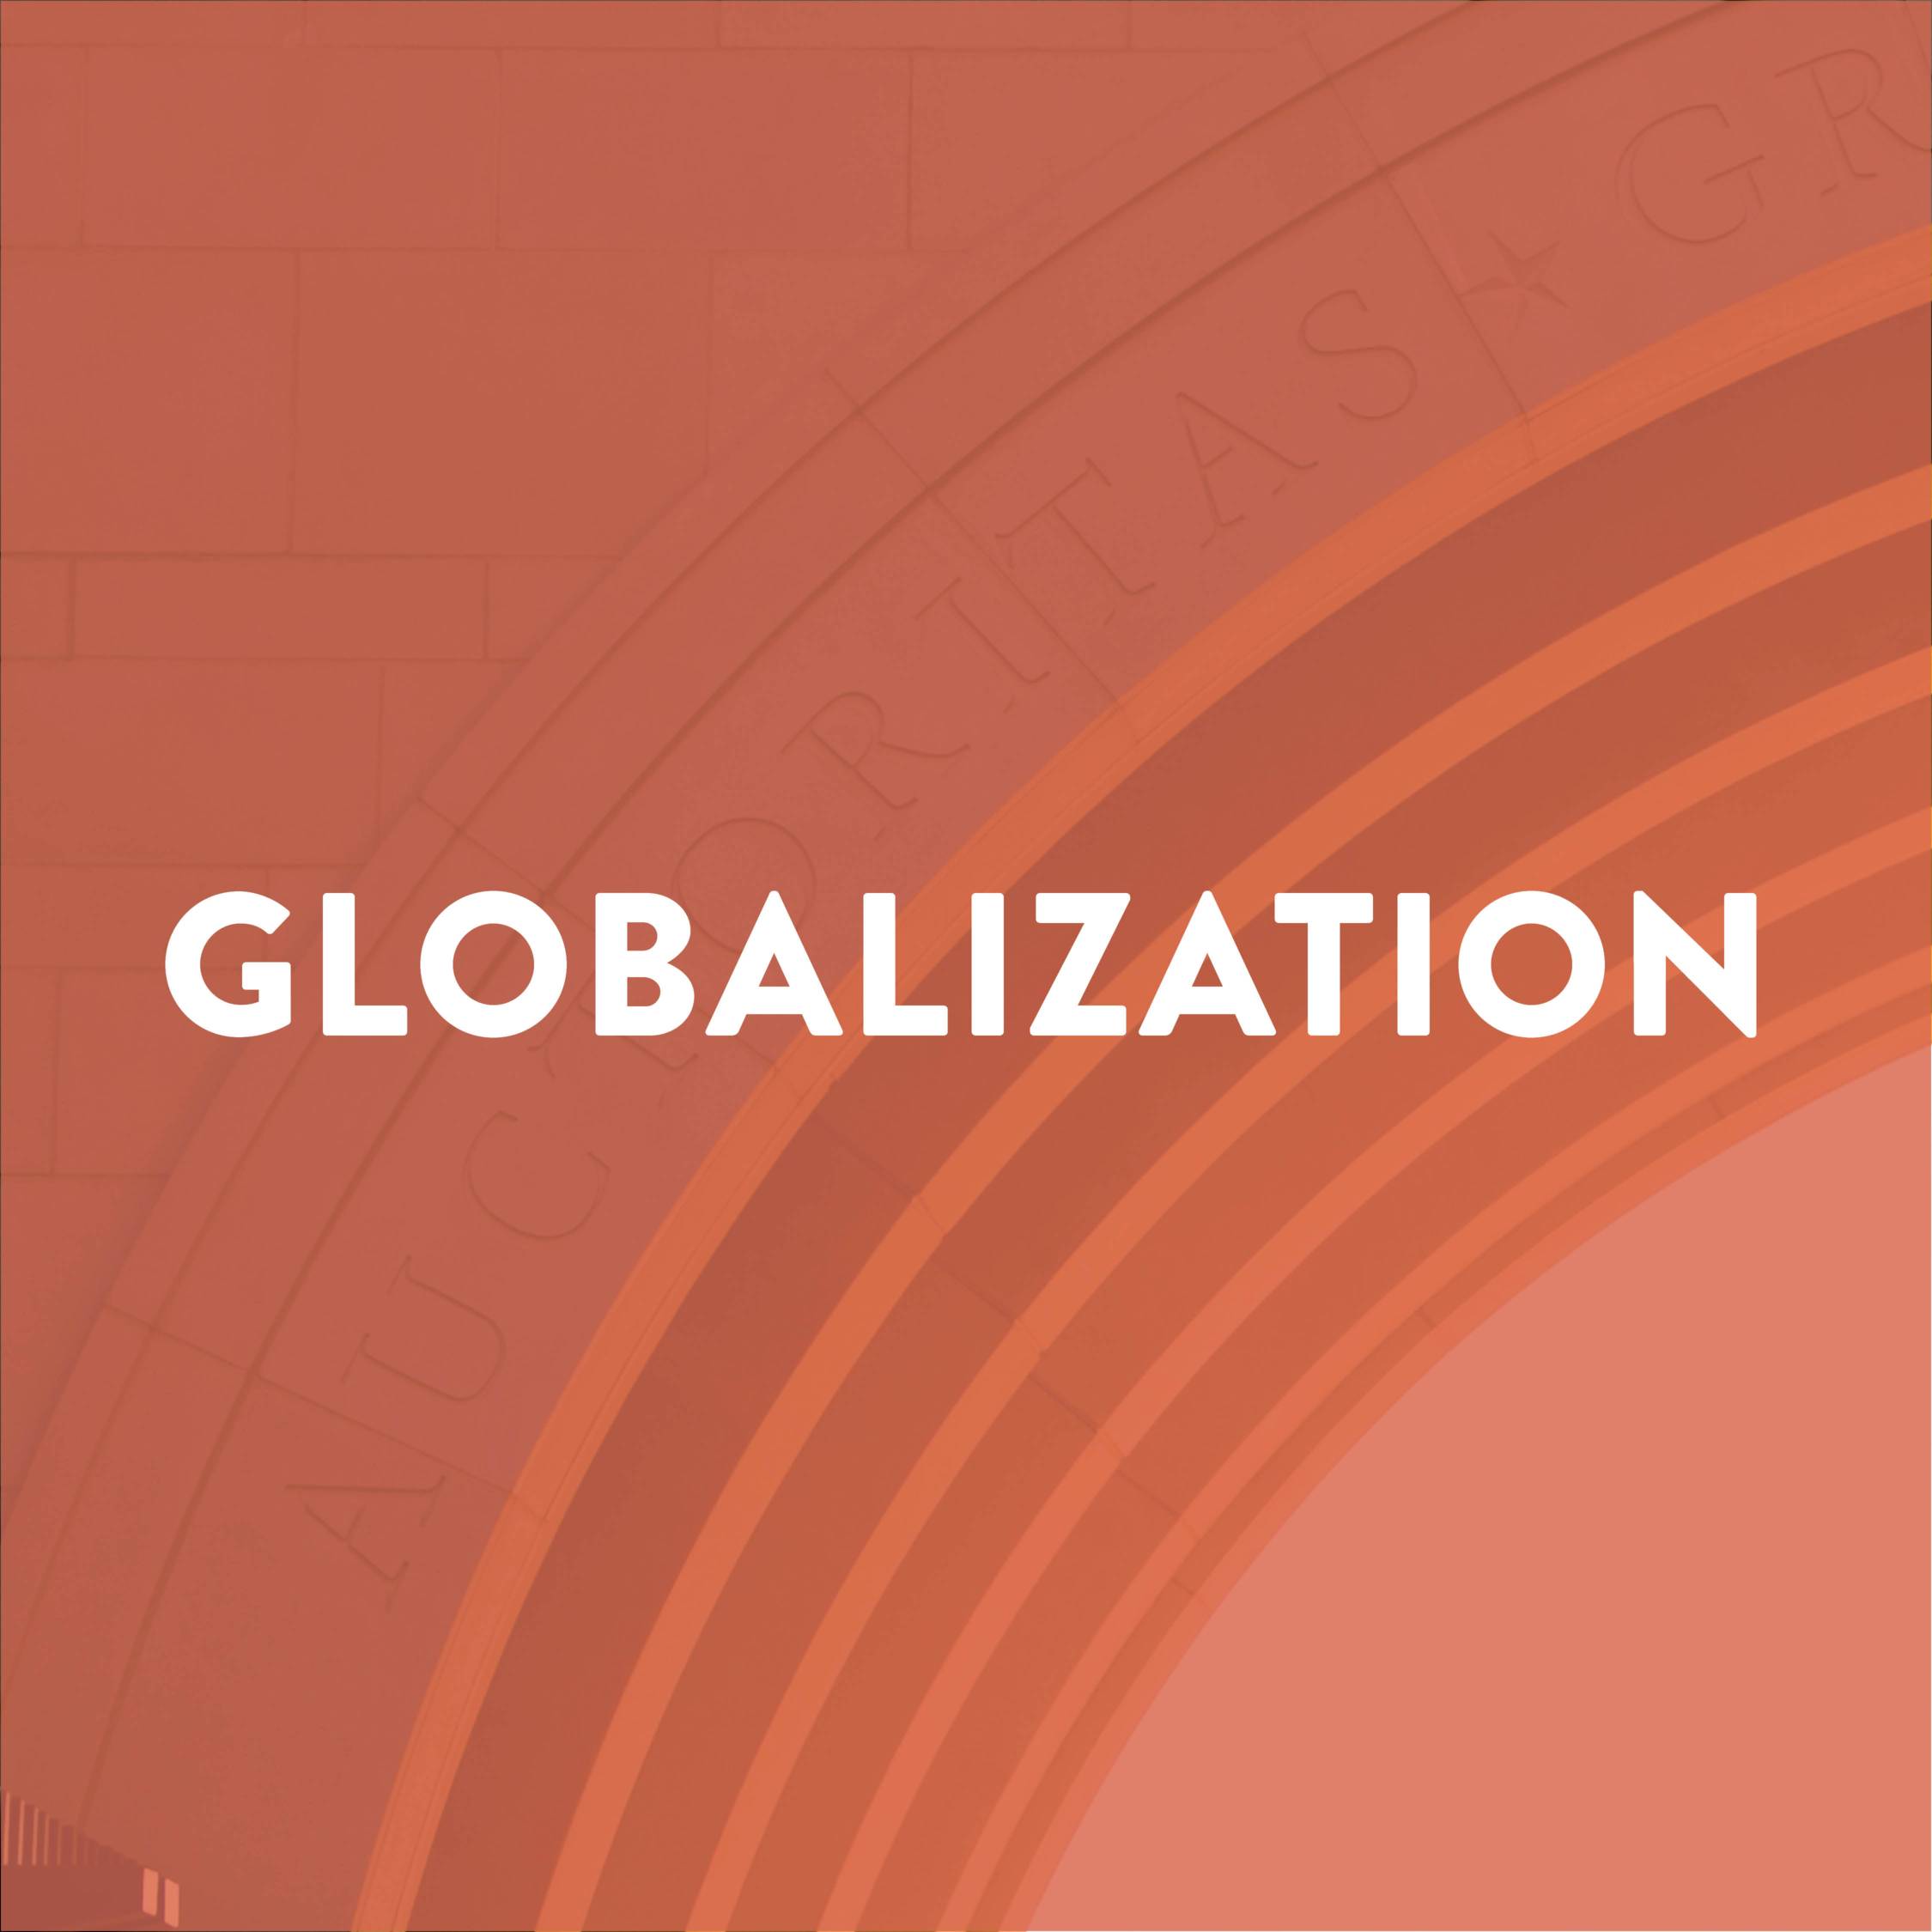 Click here to learn more about the MPA Program's initiative on globalization.